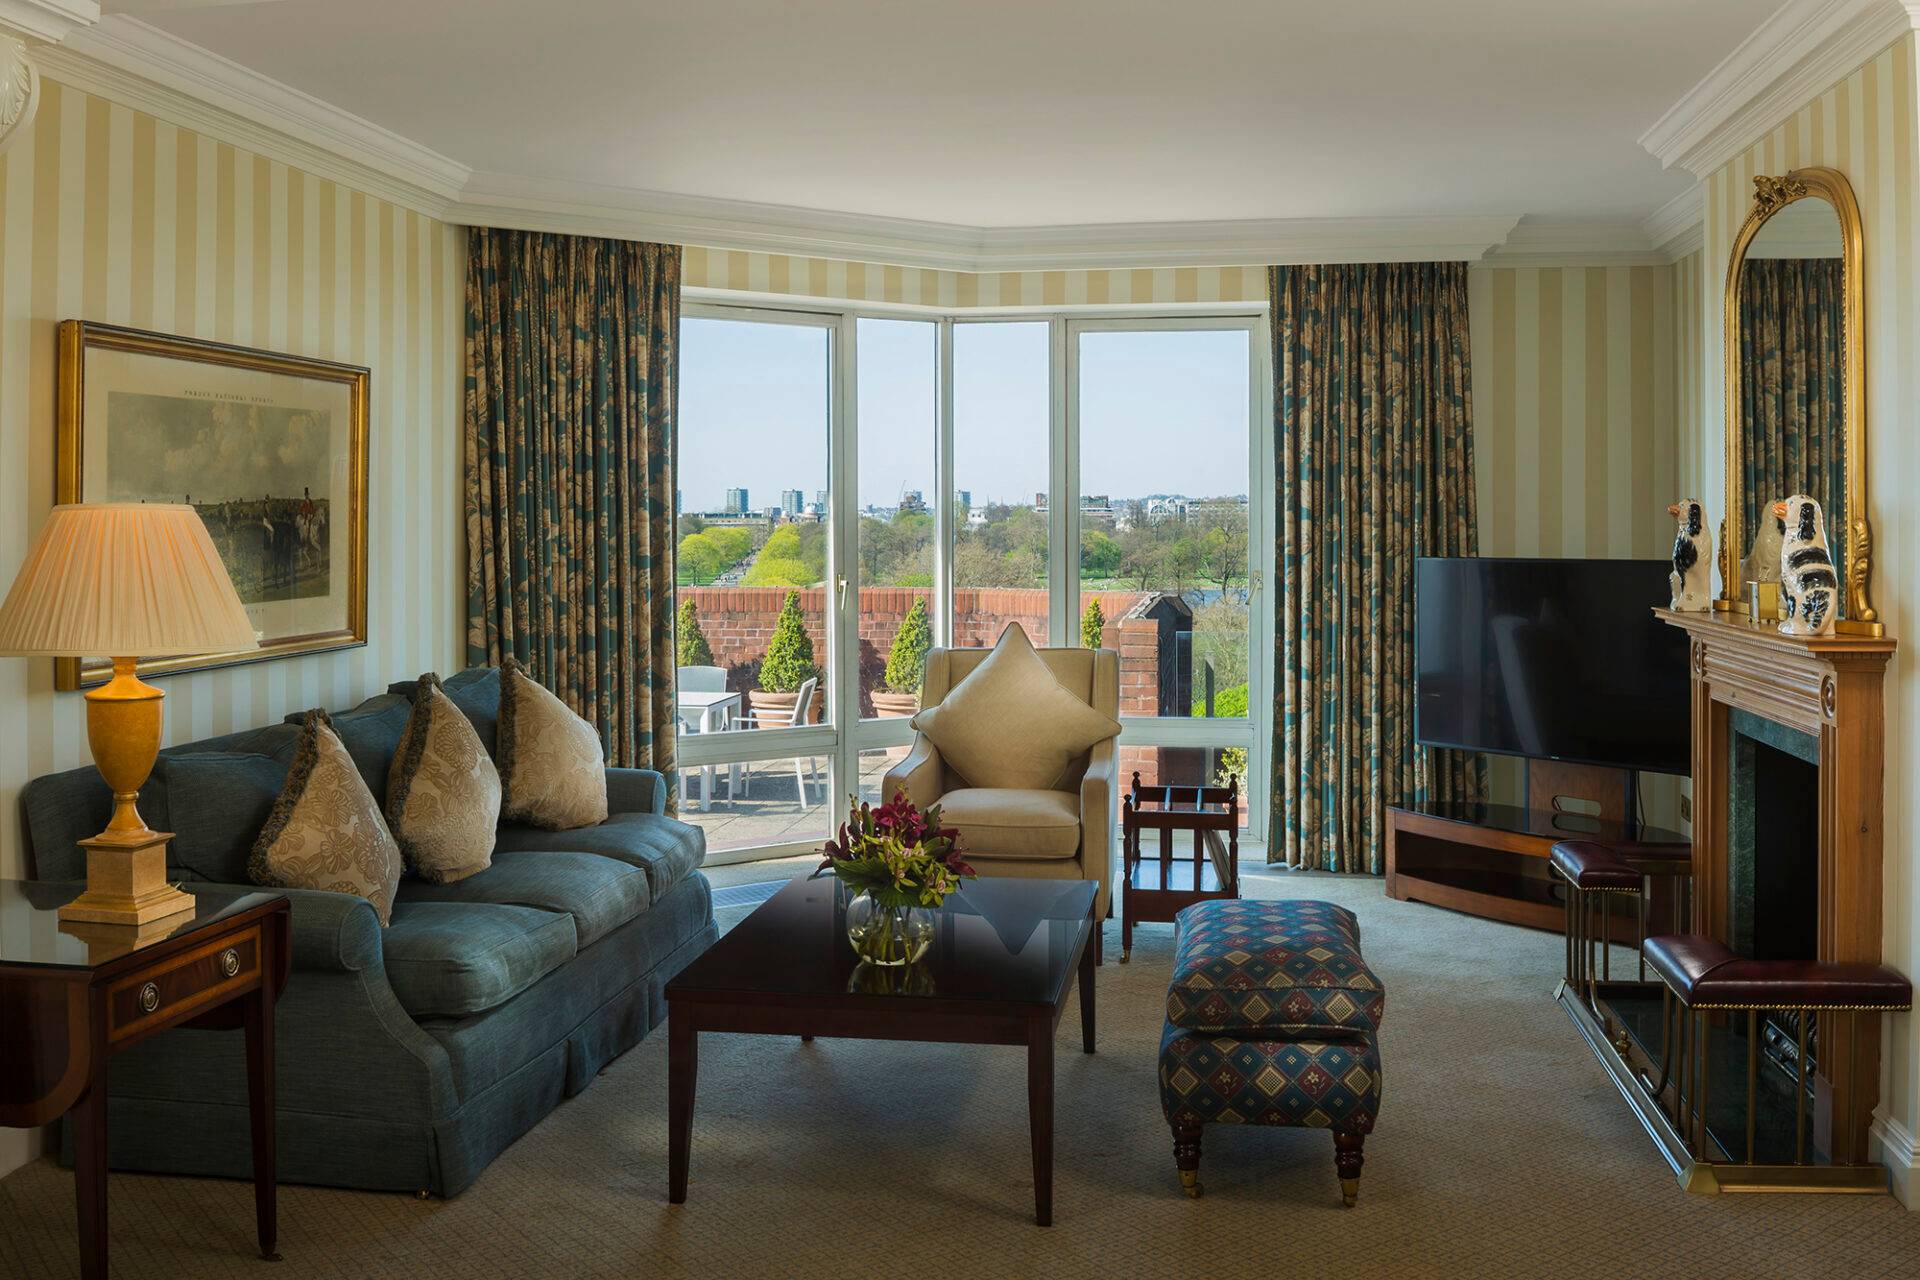 SHORT LET: Stunning Two-Bedroom Penthouse Serviced Apartment in prestigious Kensington Gardens with Panoramic Hyde Park Views and Luxury Amenities